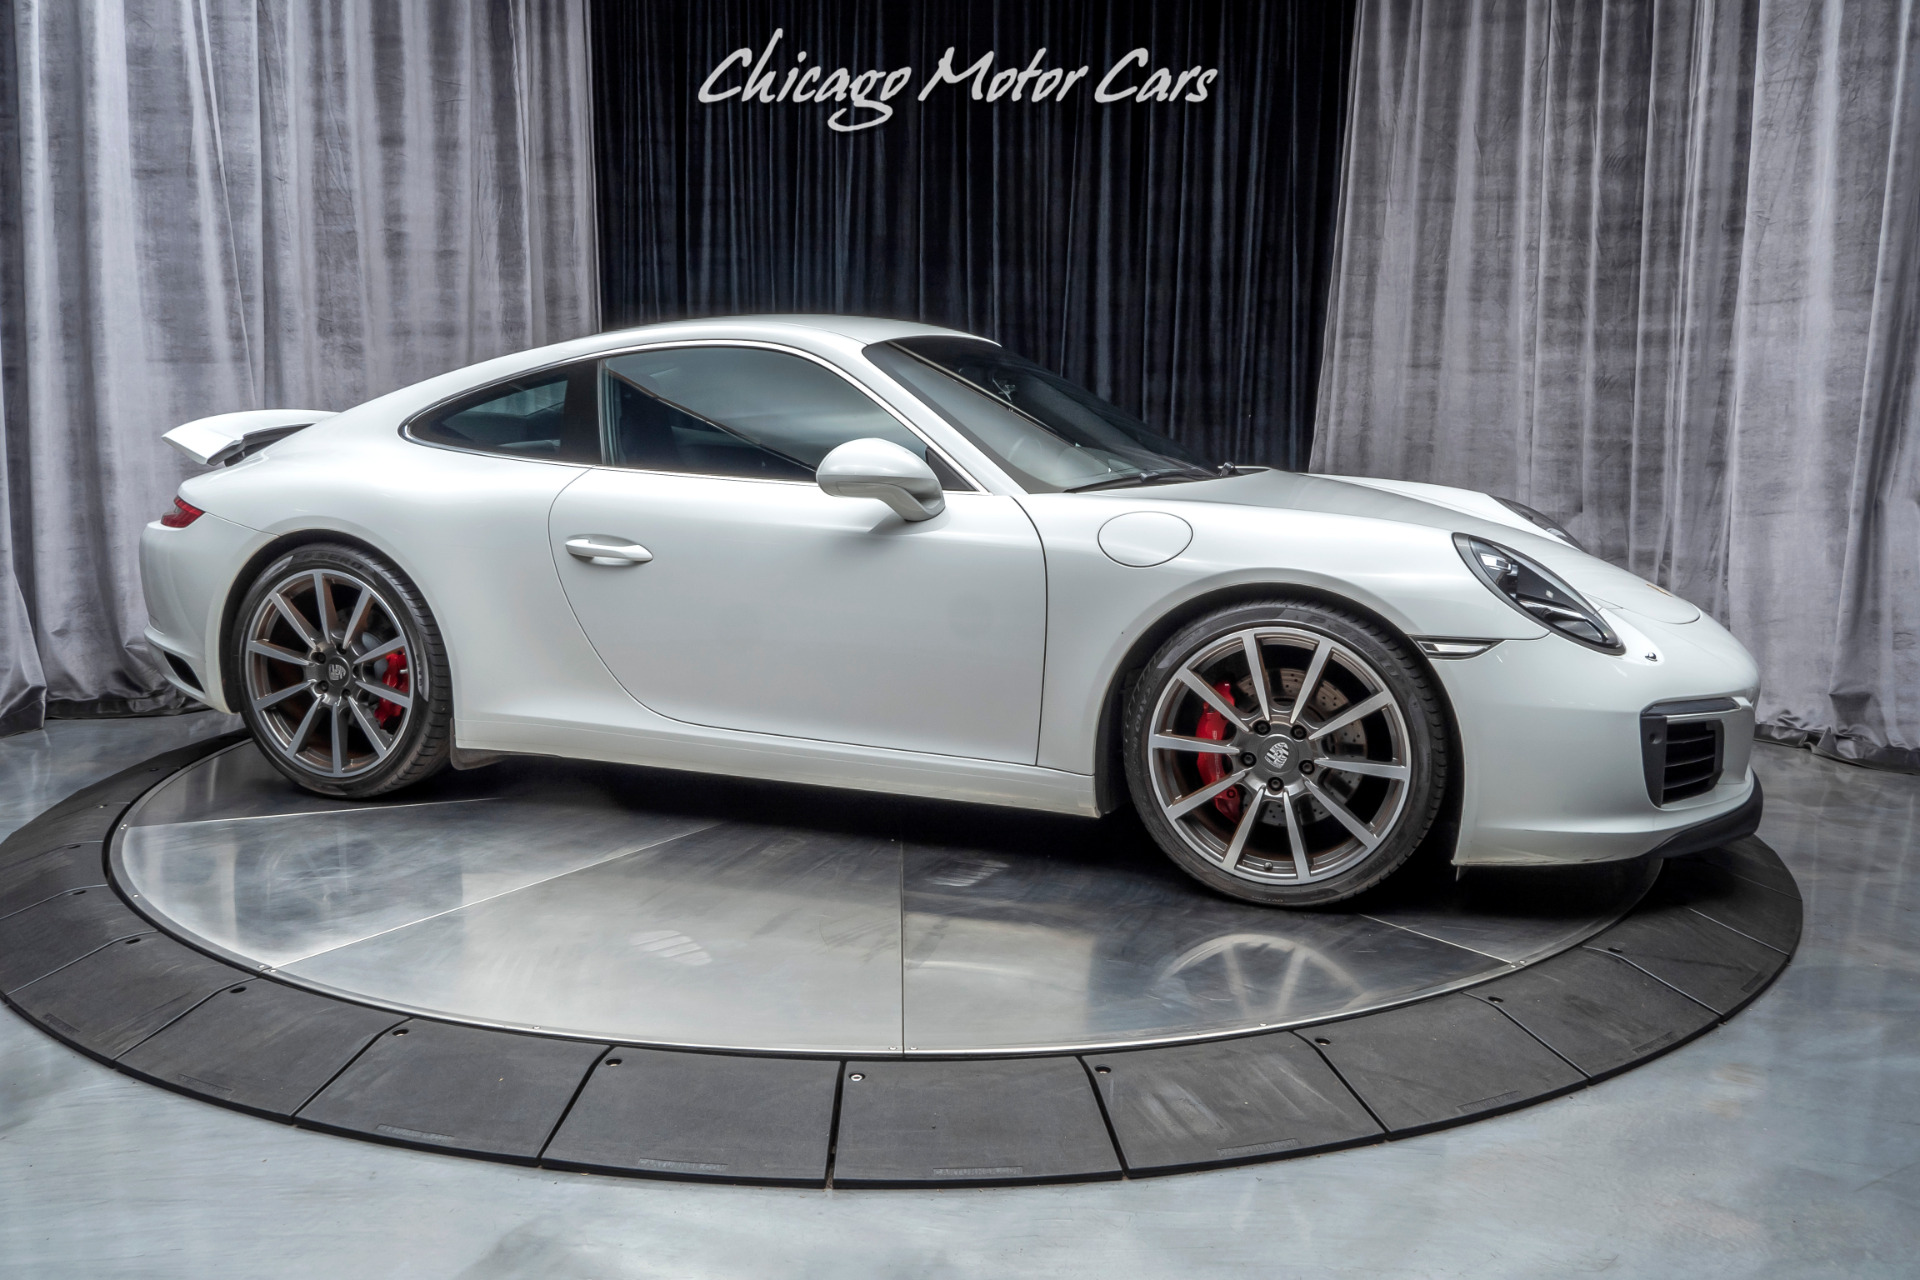 Used-2017-Porsche-911-Carrera-S-Coupe-MSRP-129K-MANUAL